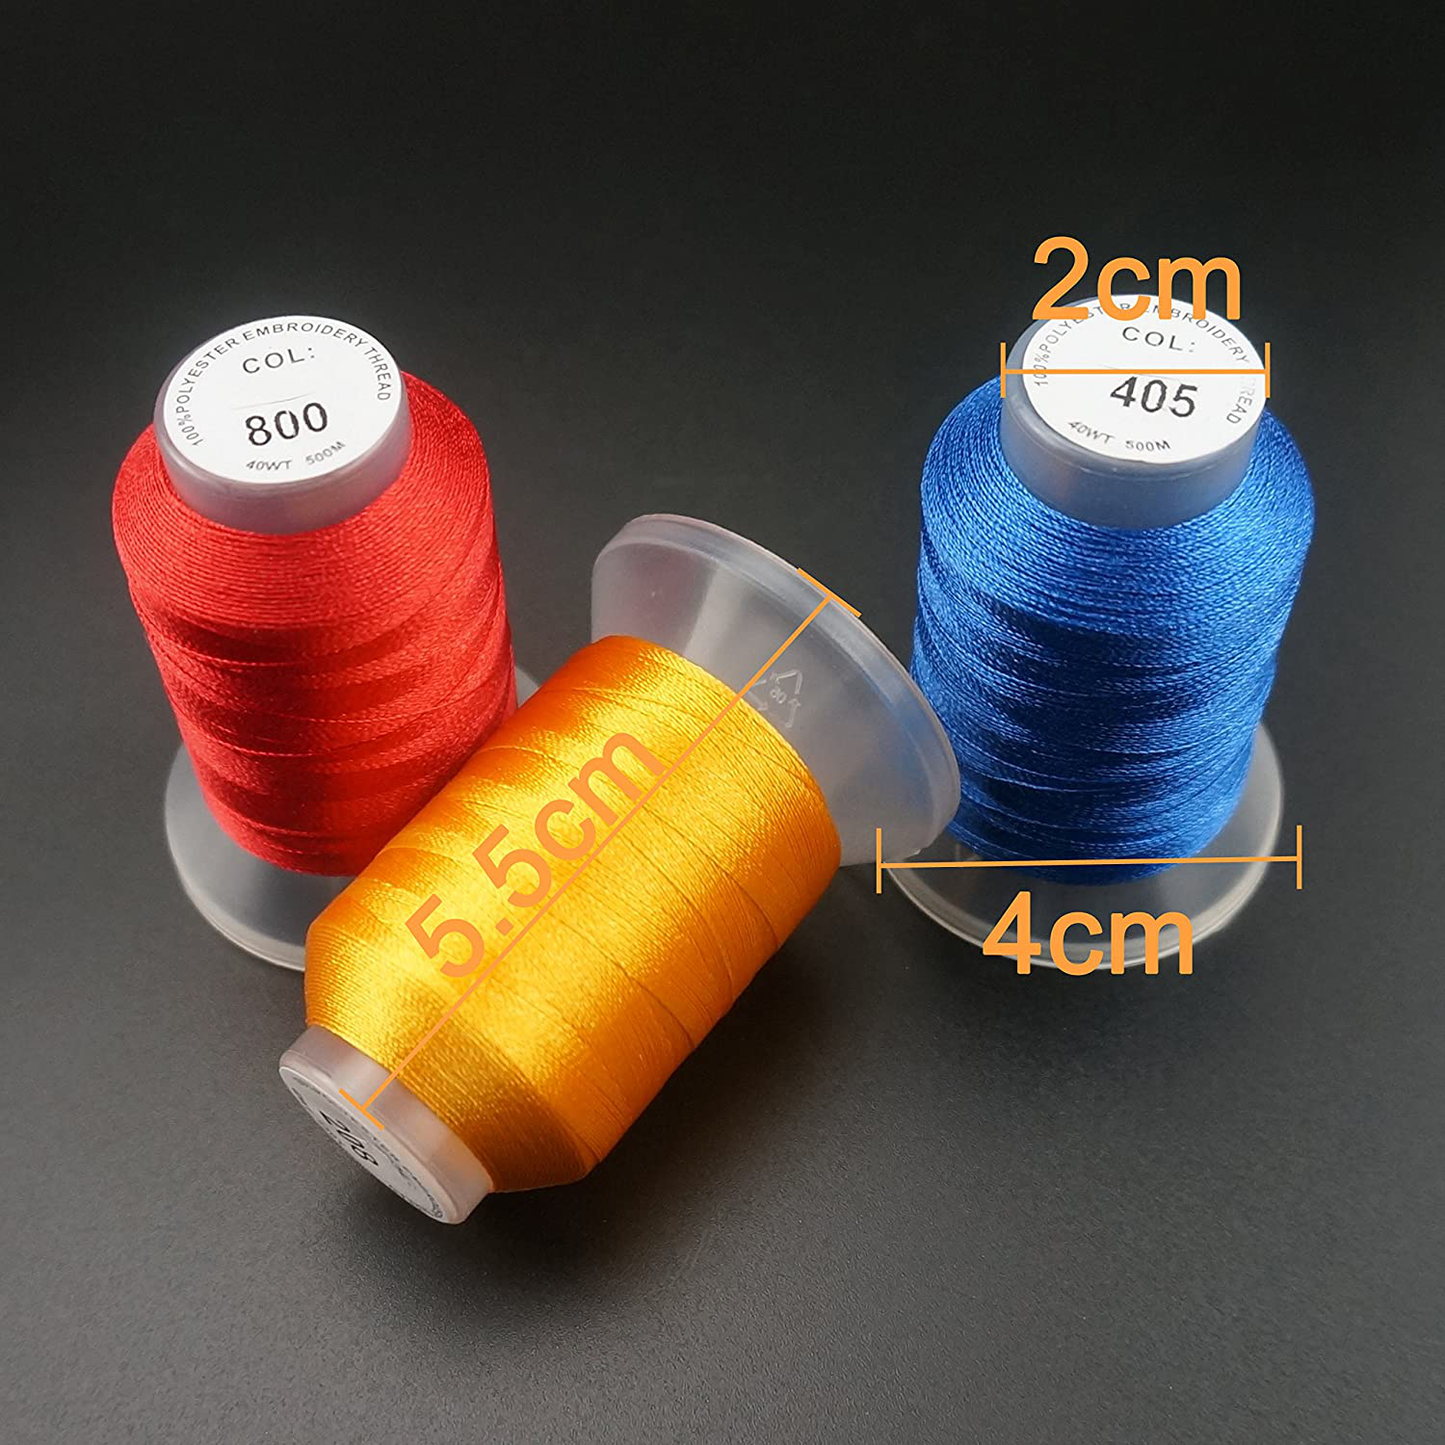 New Brothread 40 Brother Colors Polyester Embroidery Machine Thread Kit 500M (550Y) Each Spool for Brother Babylock Janome Singer Pfaff Husqvarna Bernina Embroidery and Sewing Machines